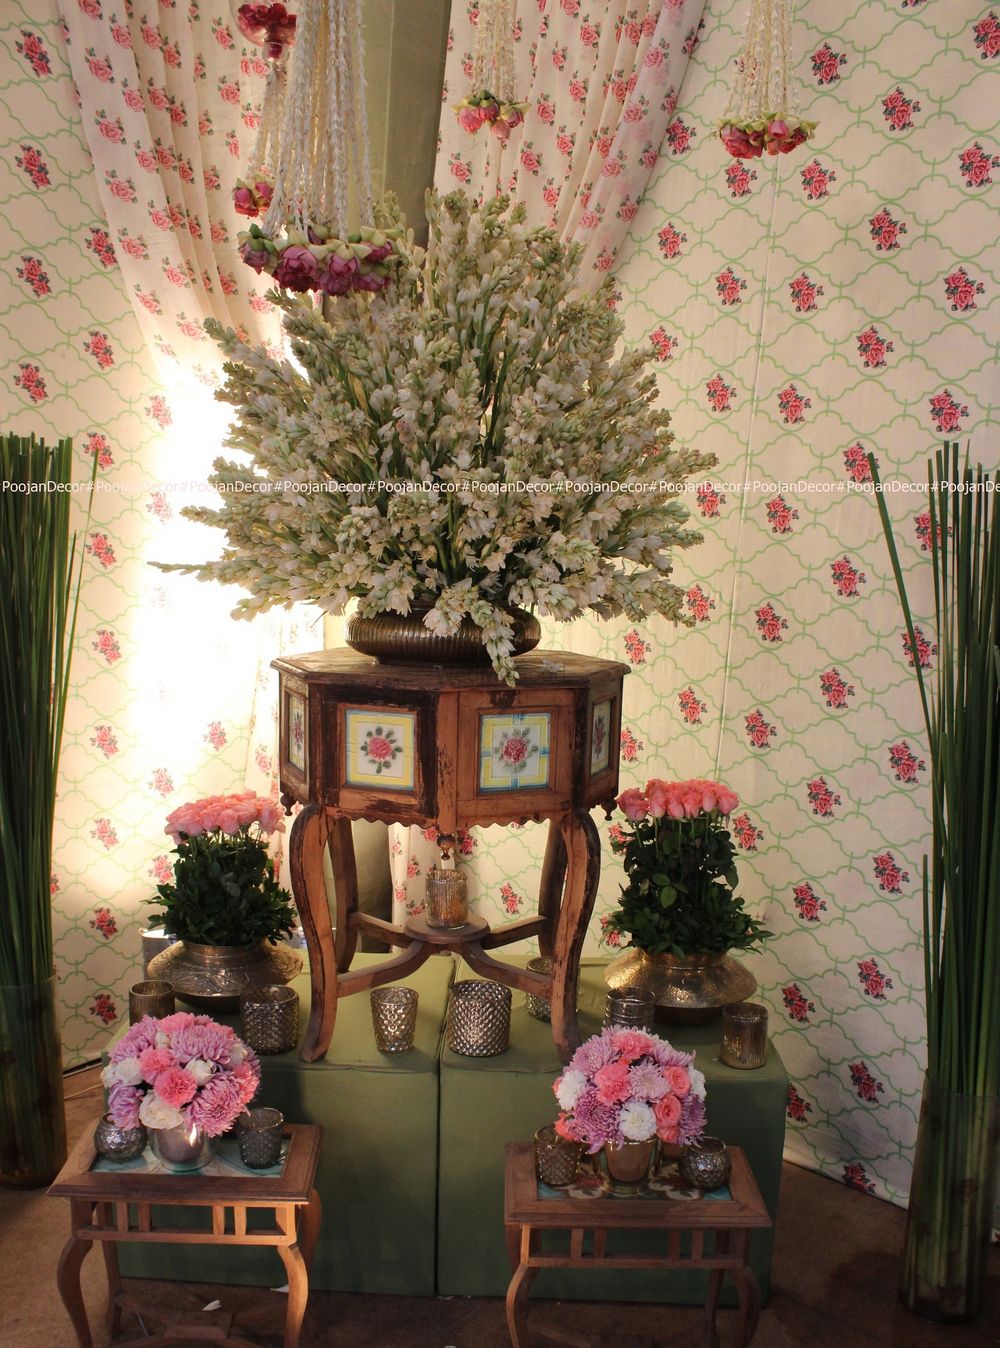 Photo From Elegant Roses and tuberoses Reception set up - By Poojan Decor